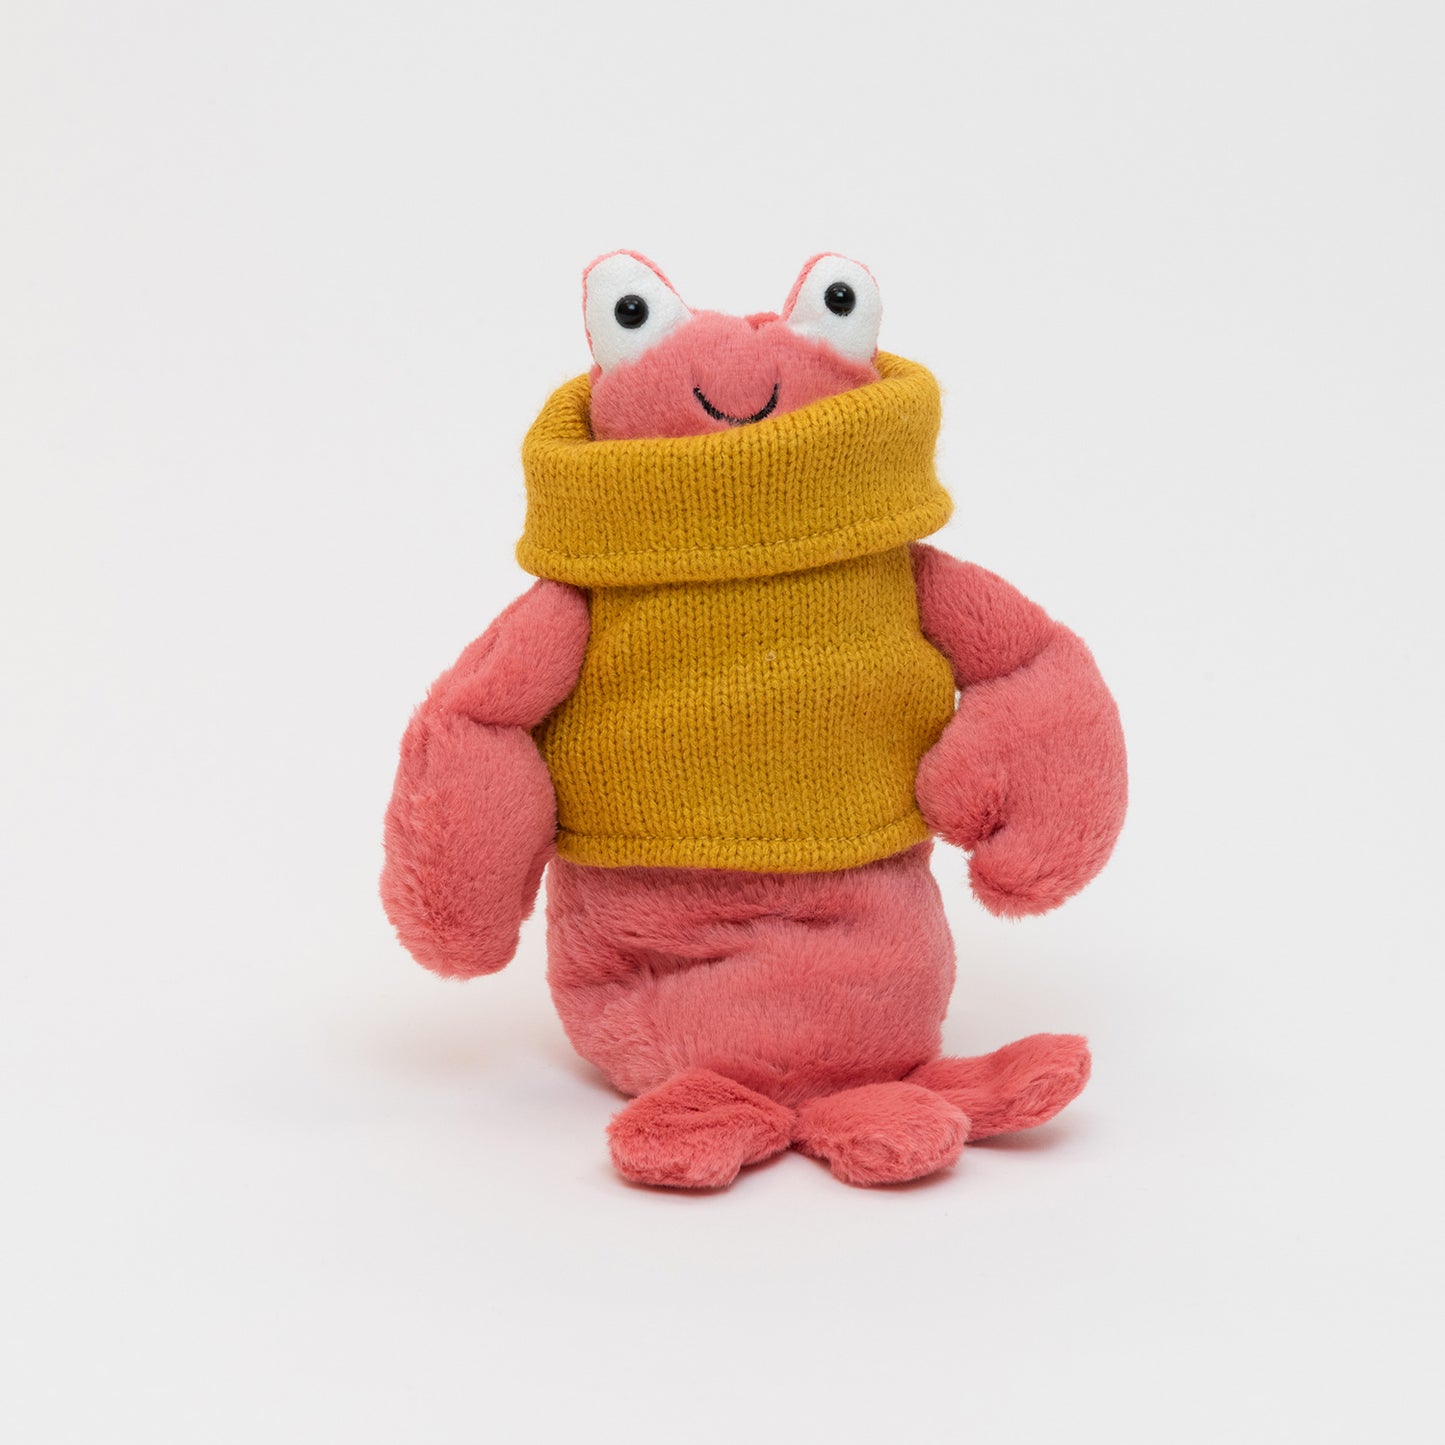 A pink plush lobster smiling and wearing a yellow jumper. Pictured on a white background.